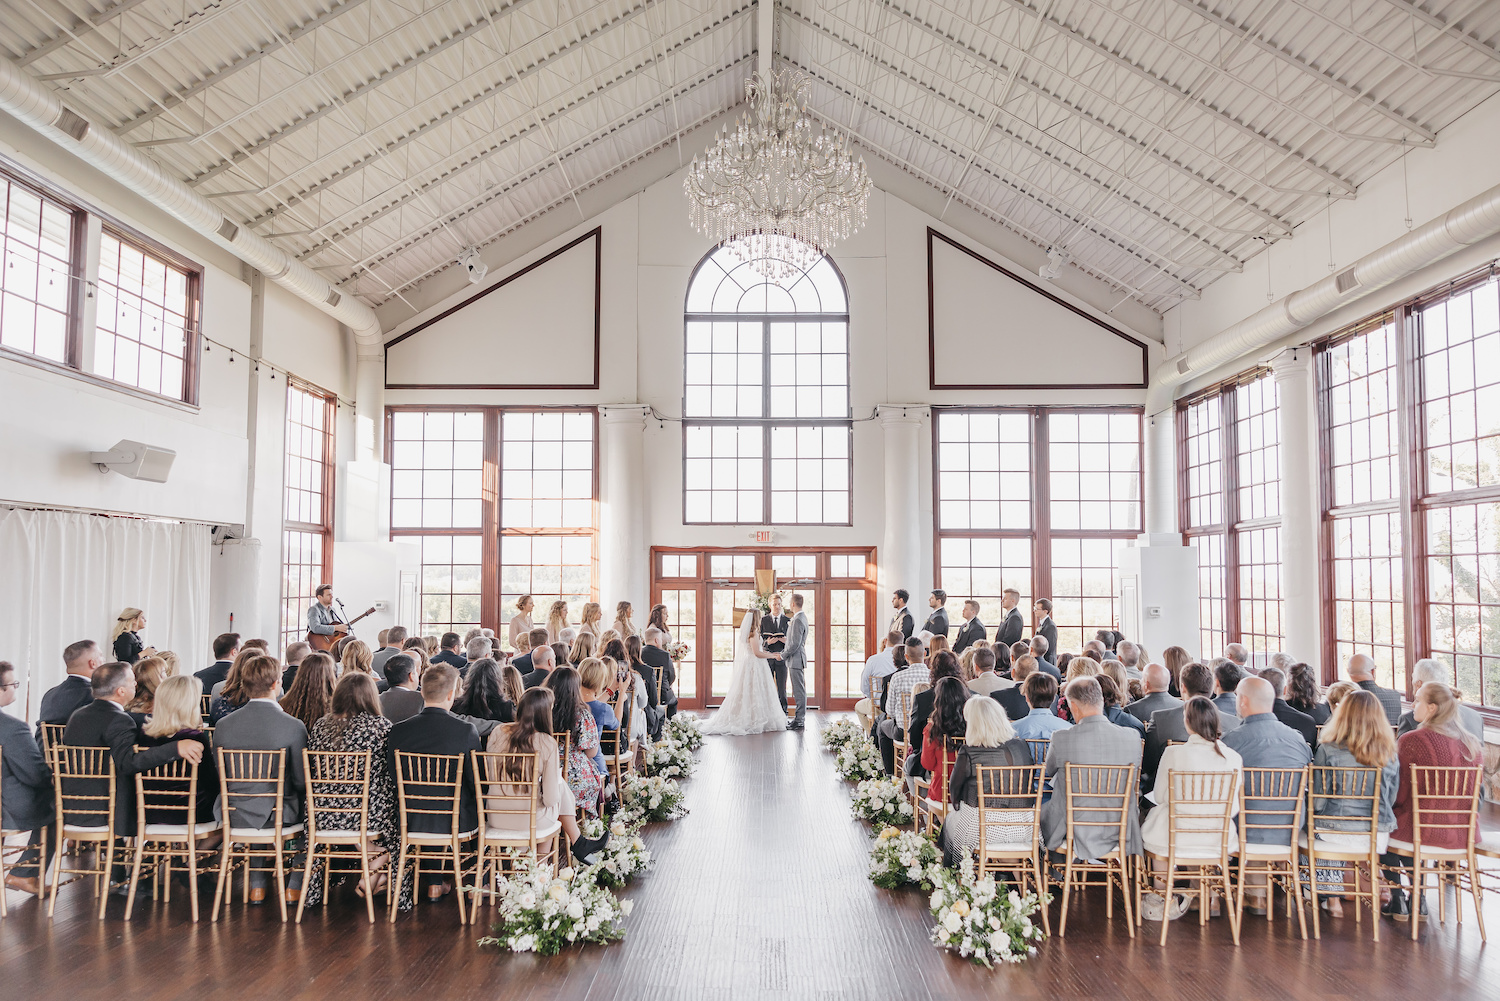 Wedding ceremony with bride and groom at the altar inside a stunning event hall, taken by Rachel Yearick Photography